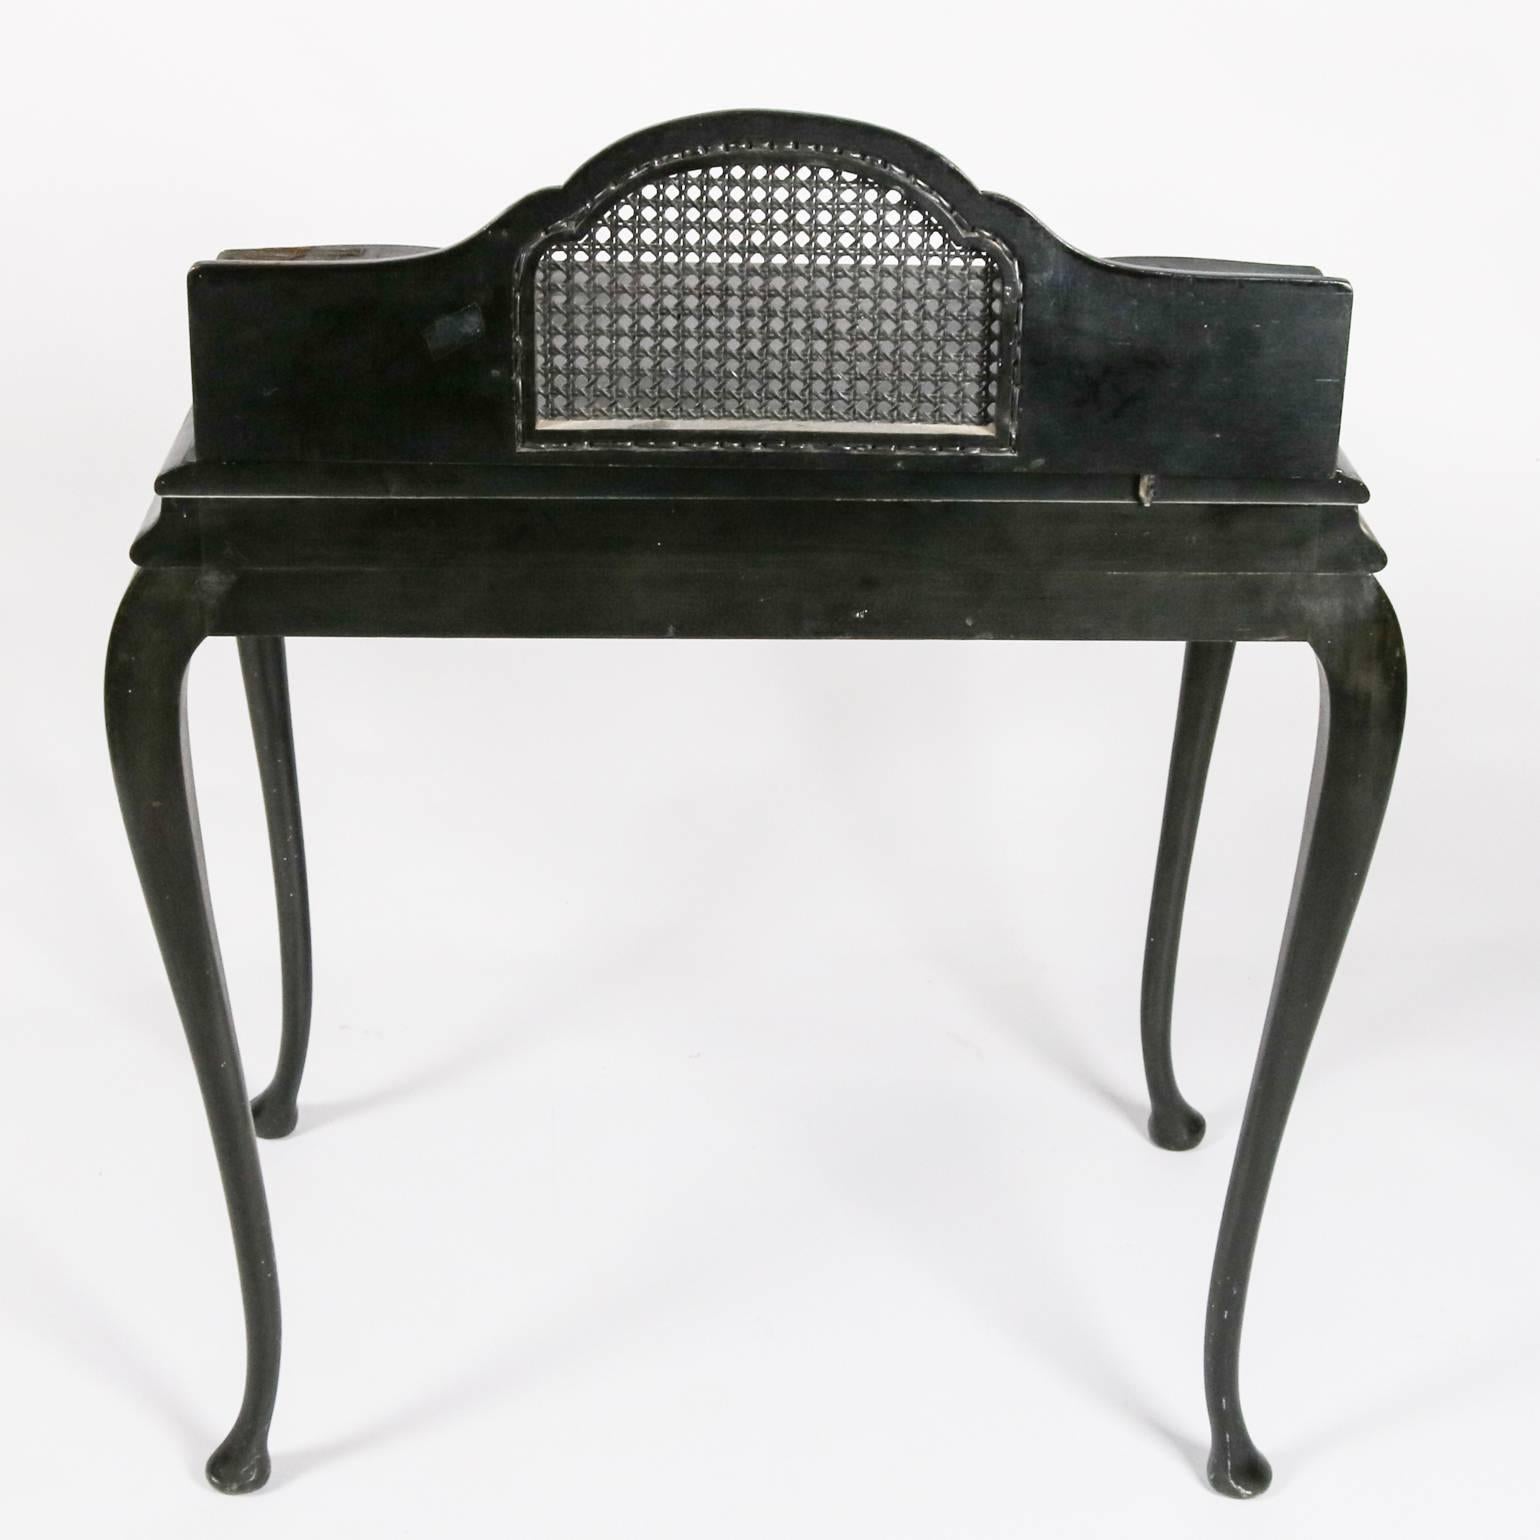 English Antique Japanned Caned Black Lacquer Paint Decorated Desk & Stool, 19th Century